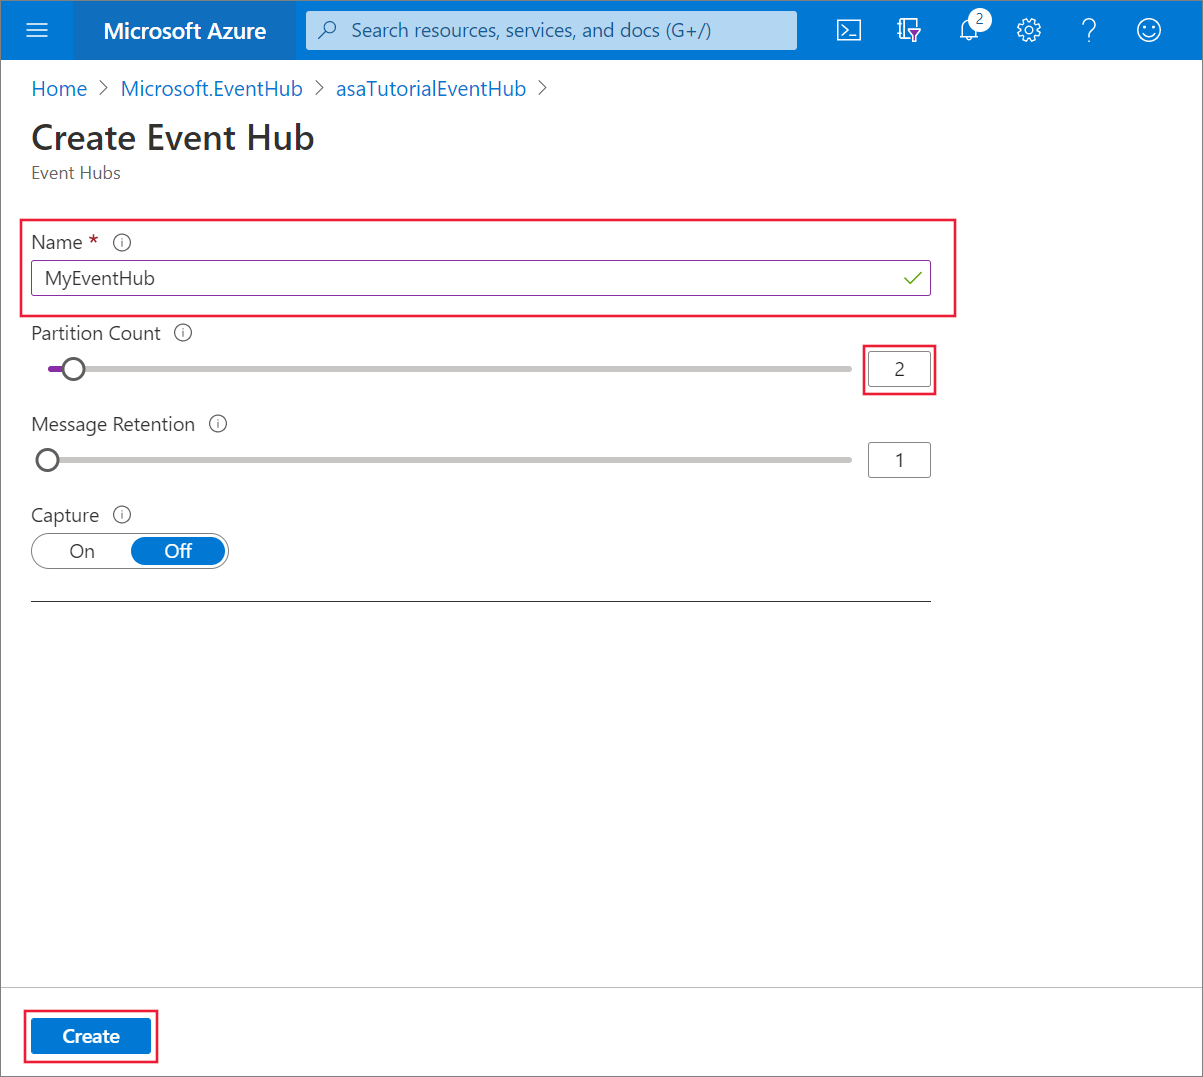 Event hub configuration in the Azure portal